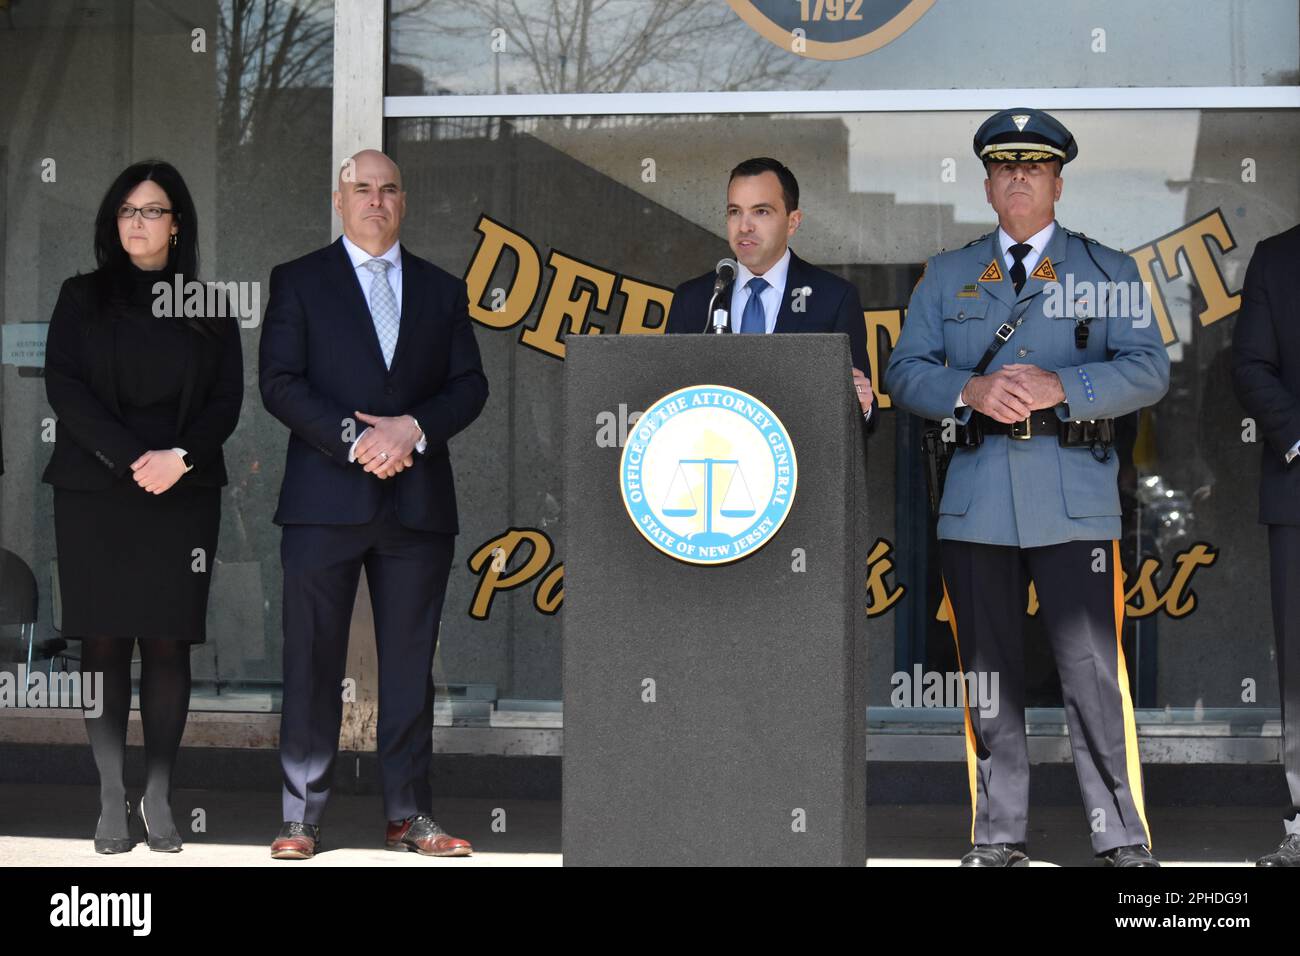 Acting Attorney General of New Jersey Matt Platkin delivers remarks. Attorney General Matthew J. Platkin held a press conference in Paterson. Attorney General Matthew J. Platkin announced that his office is superseding the Paterson Police Department, and assuming control of all police functions, including internal affairs investigations, effective immediately. Isa Abbassi, a twenty-five-year veteran of the New York City Police Department (NYPD) and its current Chief of Strategic Initiatives, will become the Officer-in-Charge of the Paterson Police Department in May, having been appointed to th Stock Photo